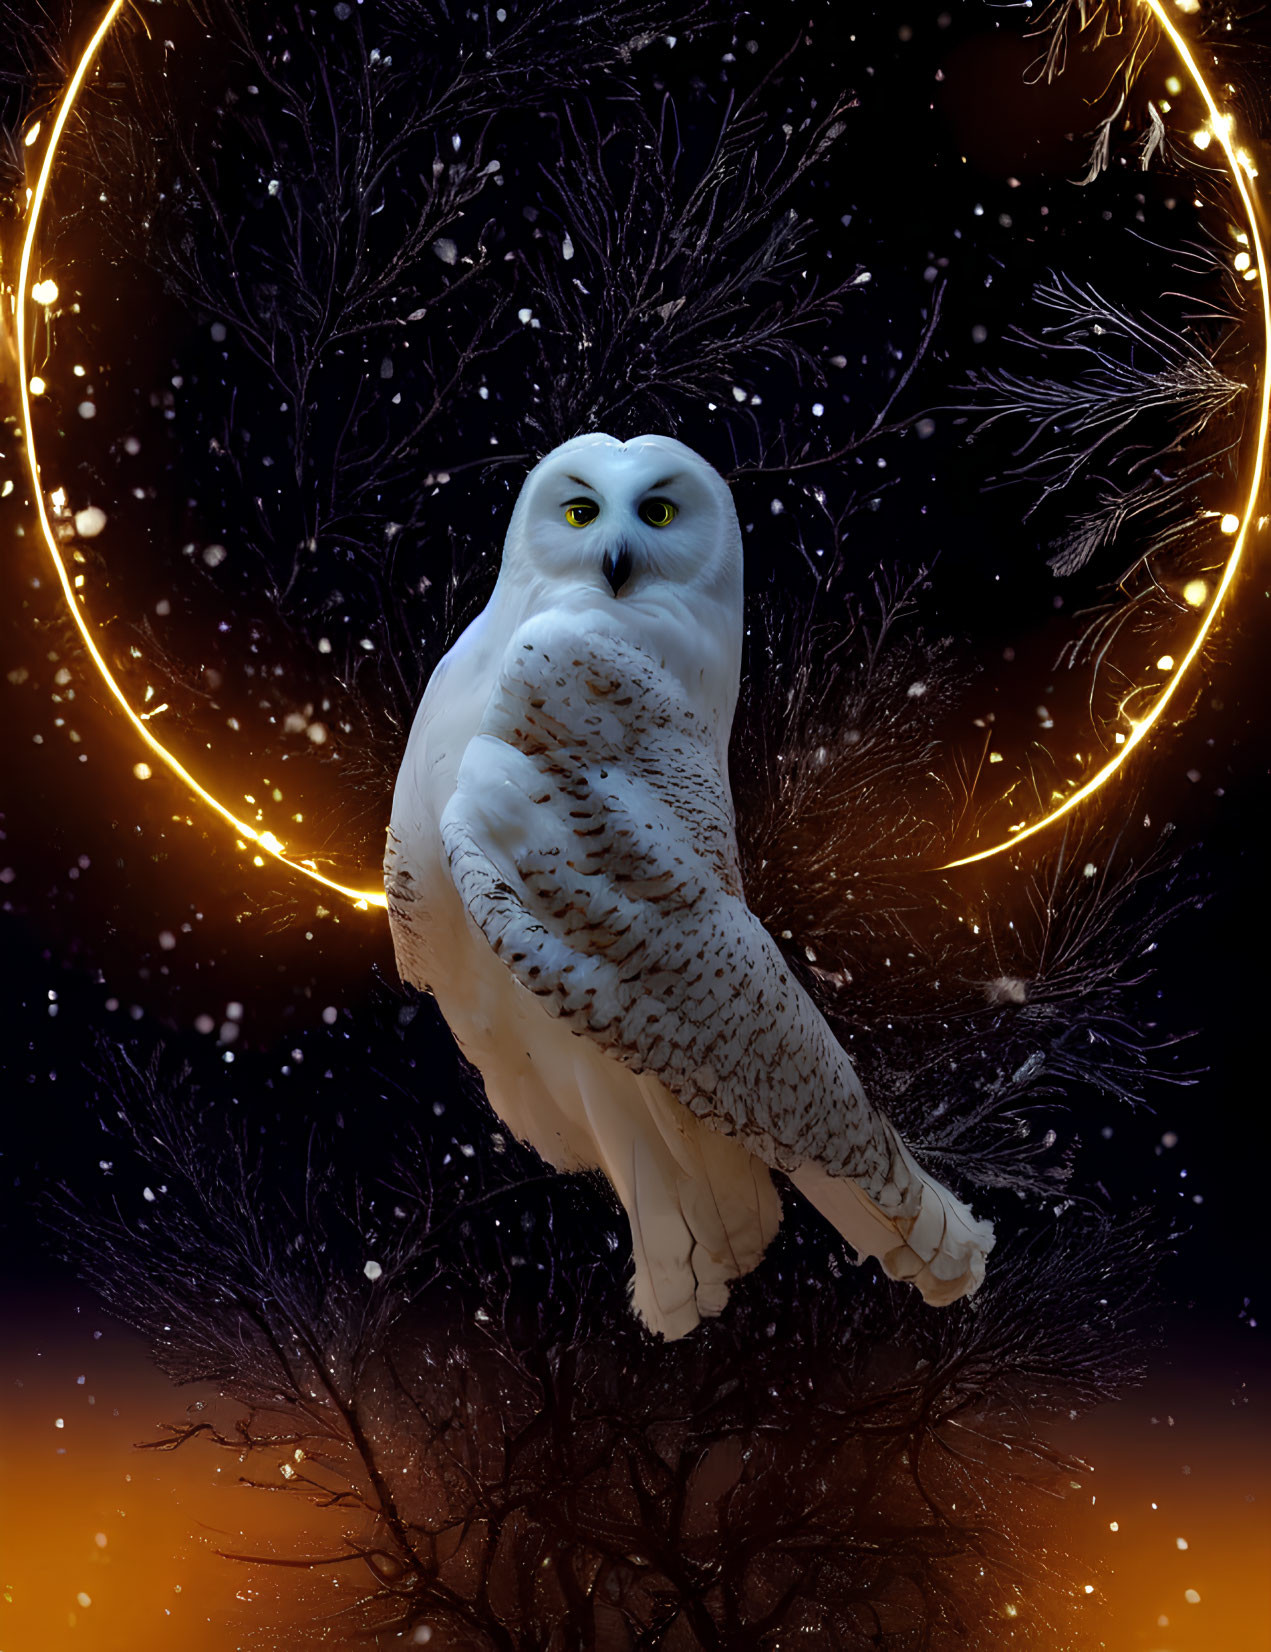 Snowy Owl Perched on Bare Tree Branch Under Crescent Moon